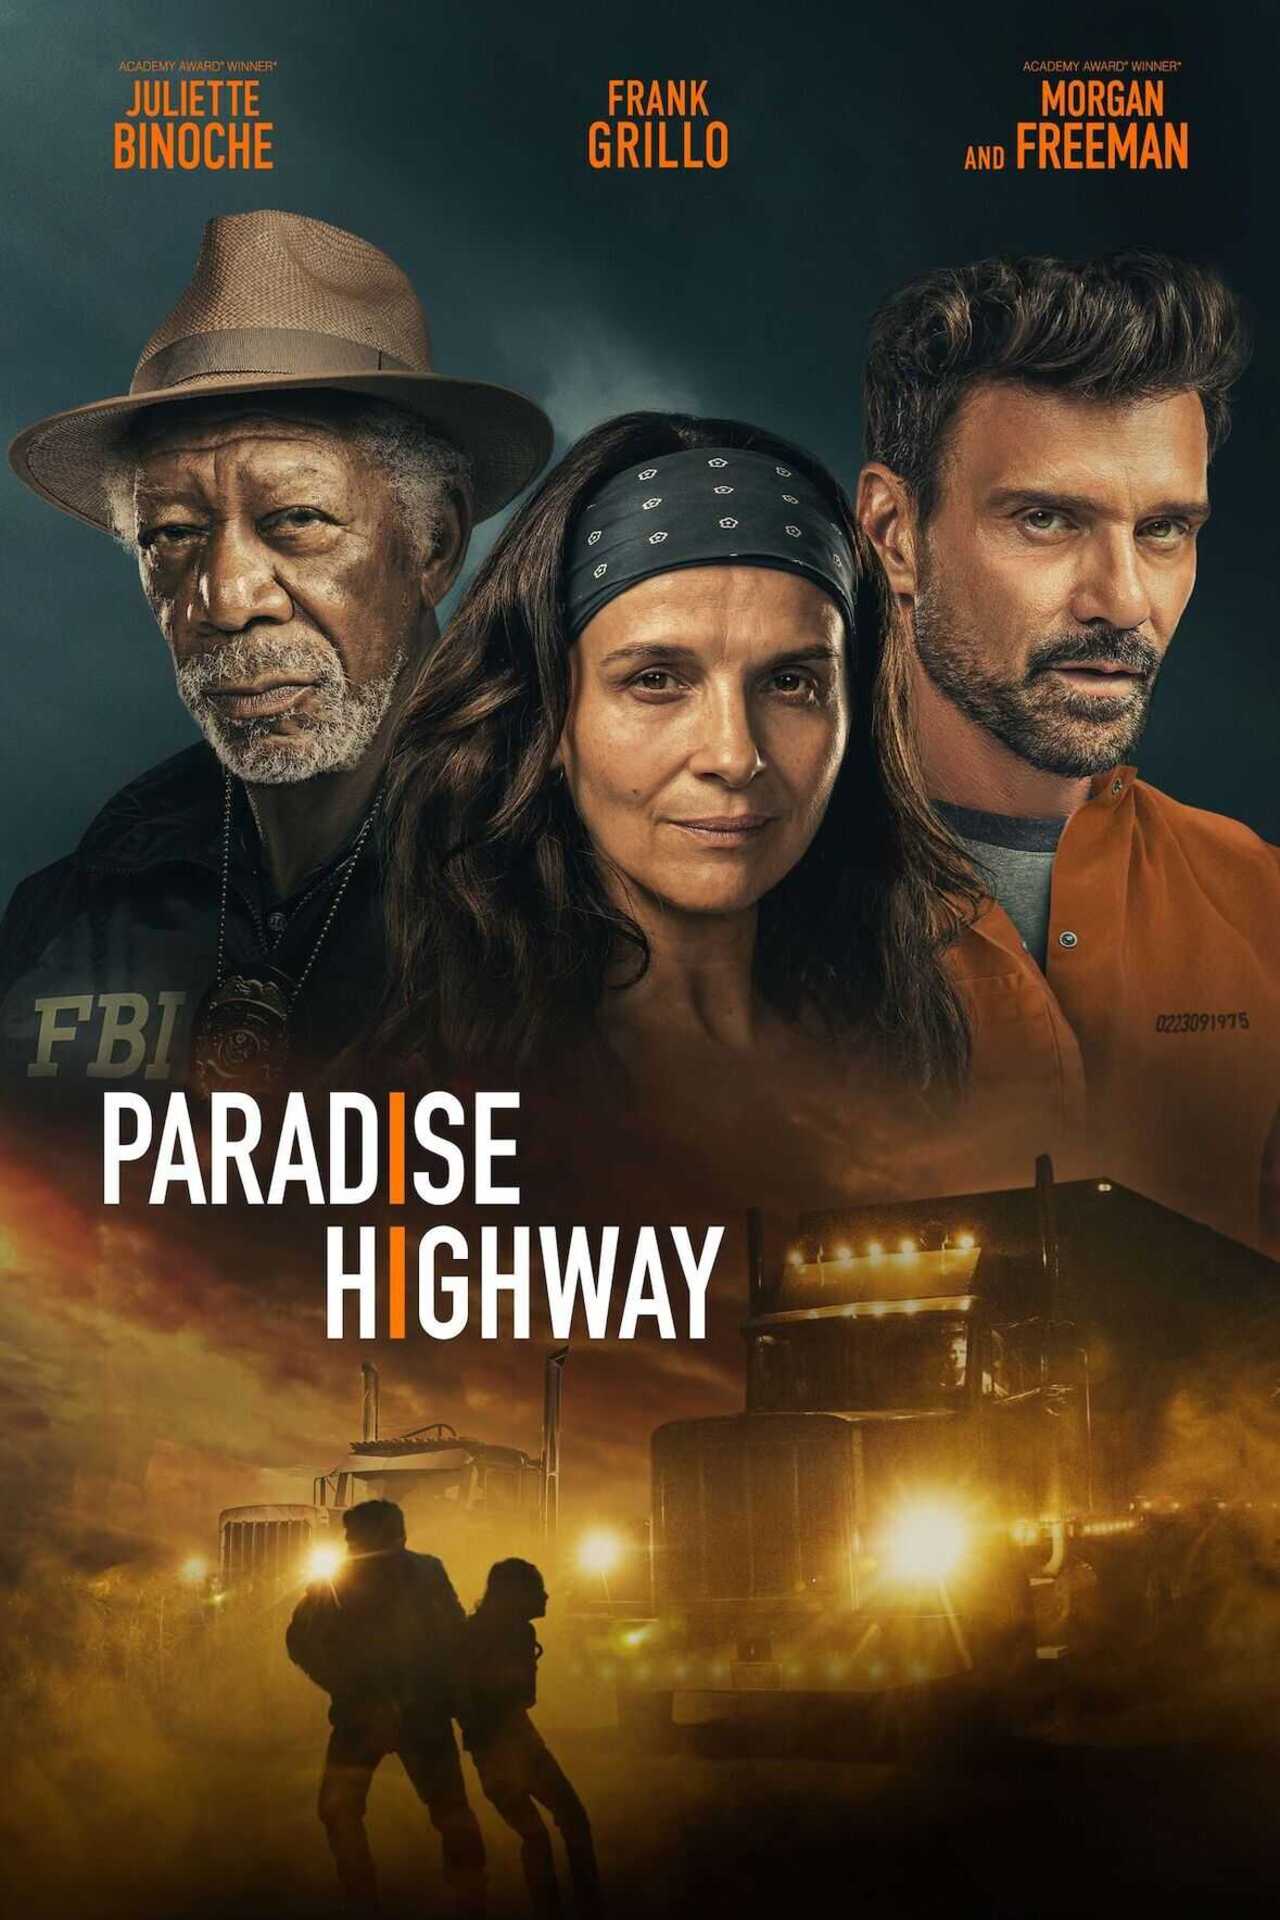 Theatrical poster for Paradise Highway. Image courtesy of Lionsgate.